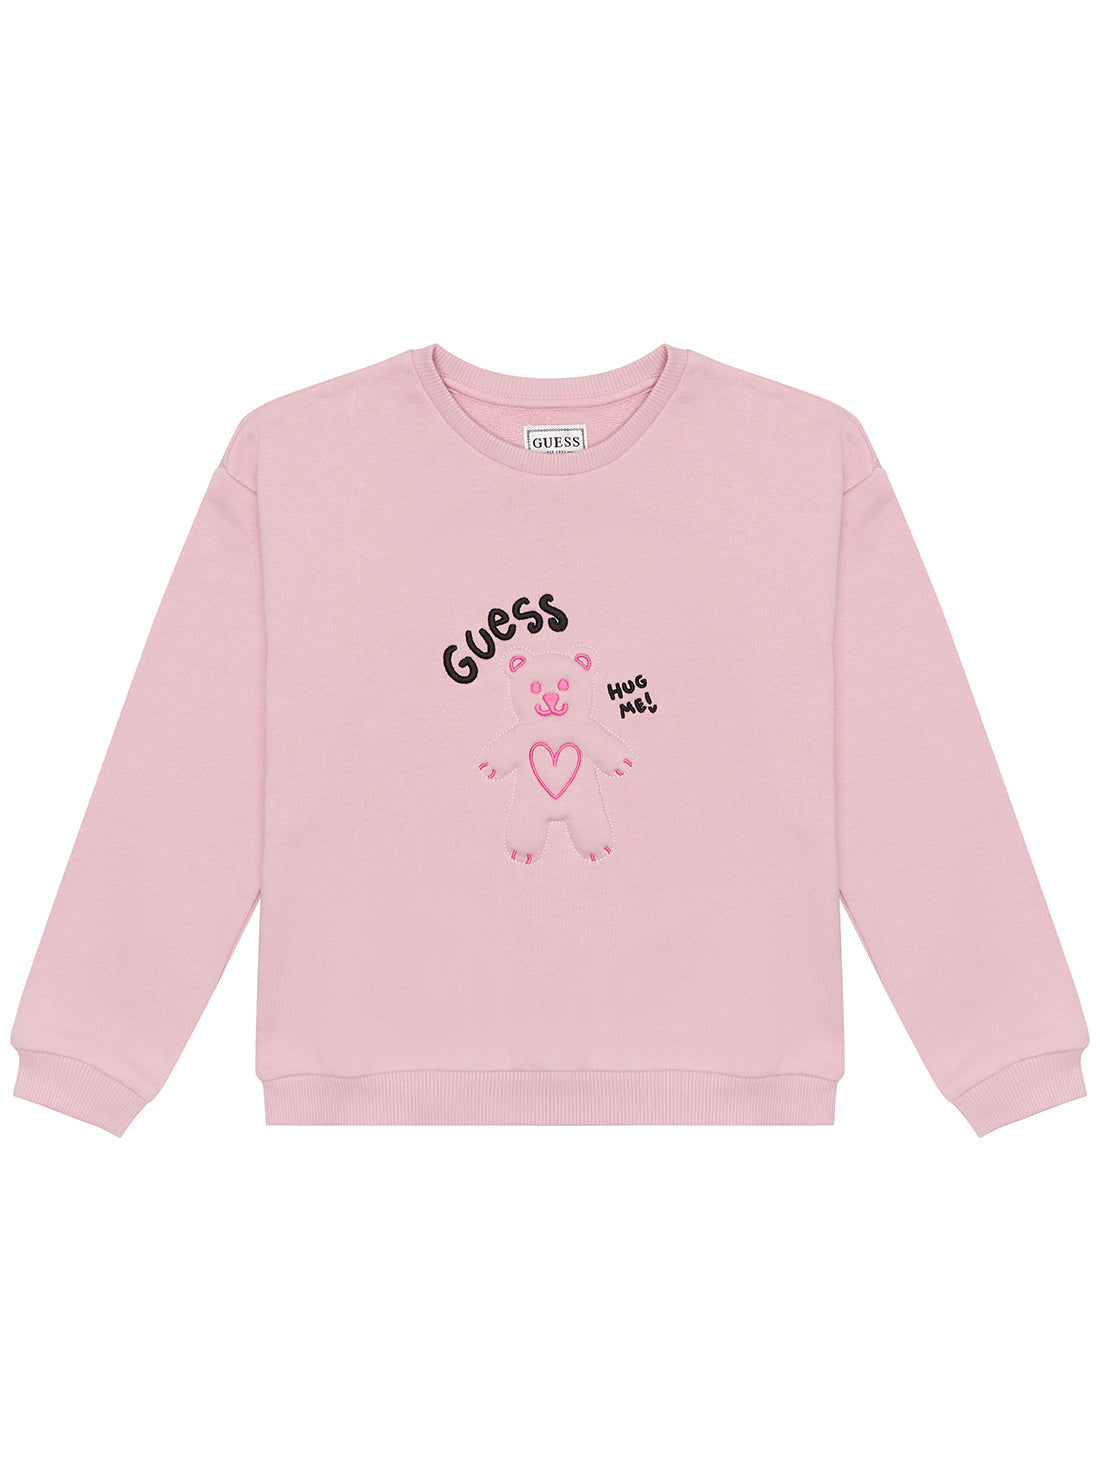 GUESS Pink Long Sleeve Jumper (2-7) front view